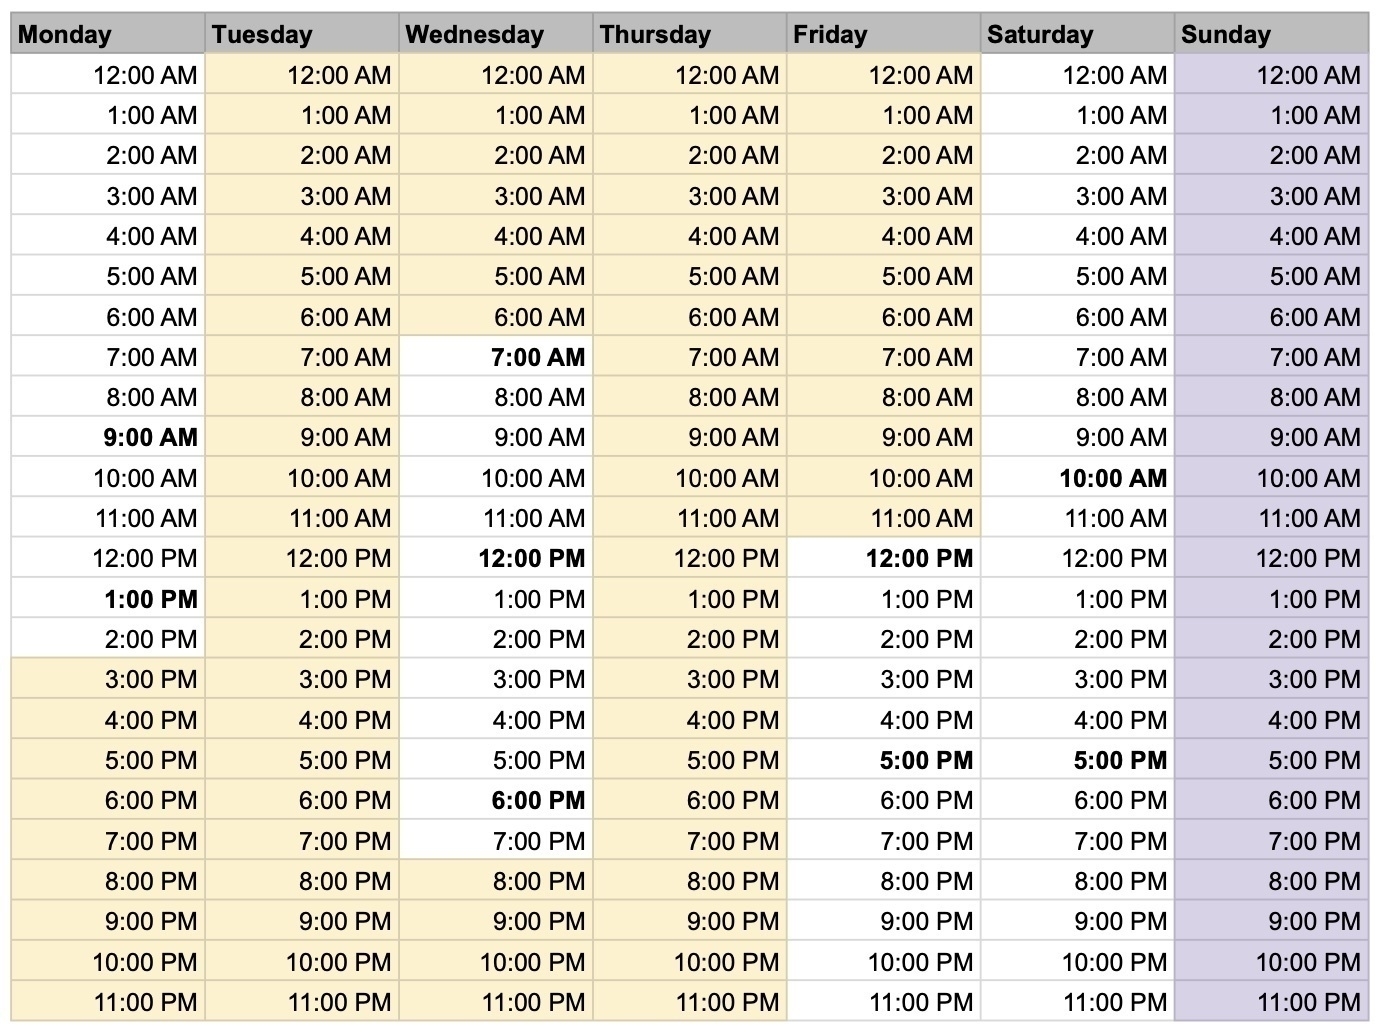 a spreadsheet showing two 40-hr fasts, Mon afternoon to Wednesday morning, and Wednesday evening through Friday midday